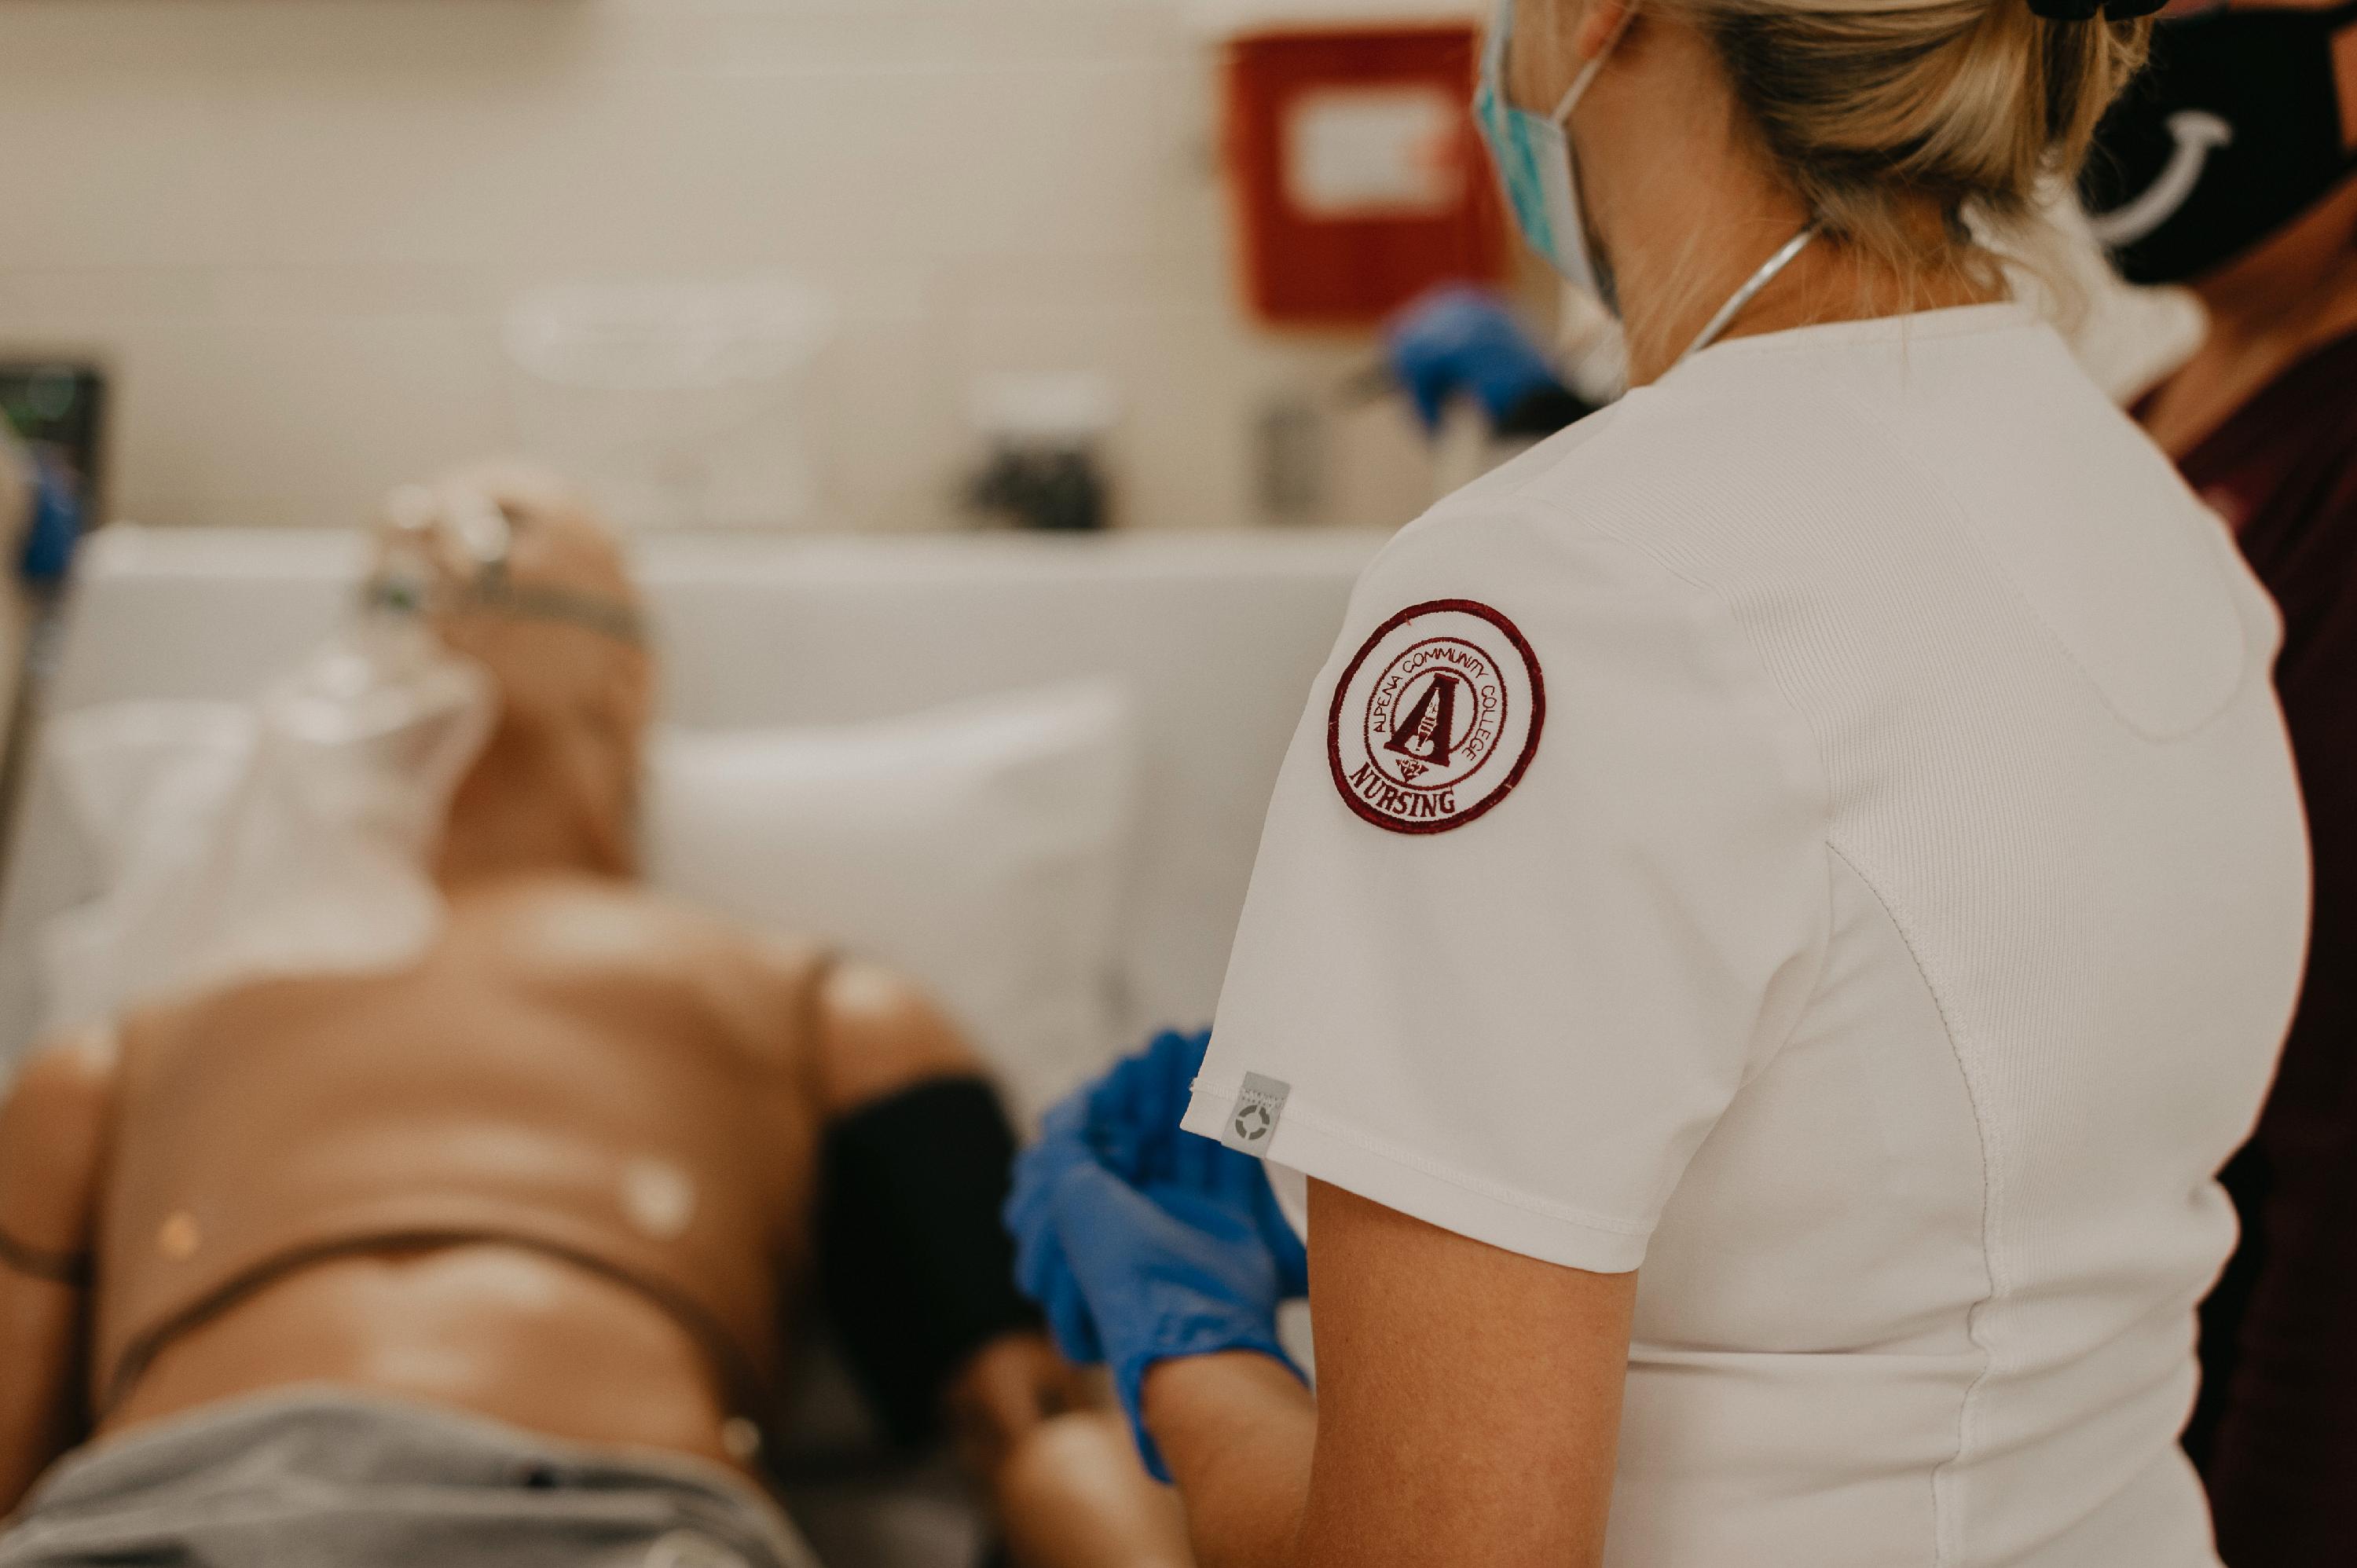 A nursing student stands on the side of a manikin